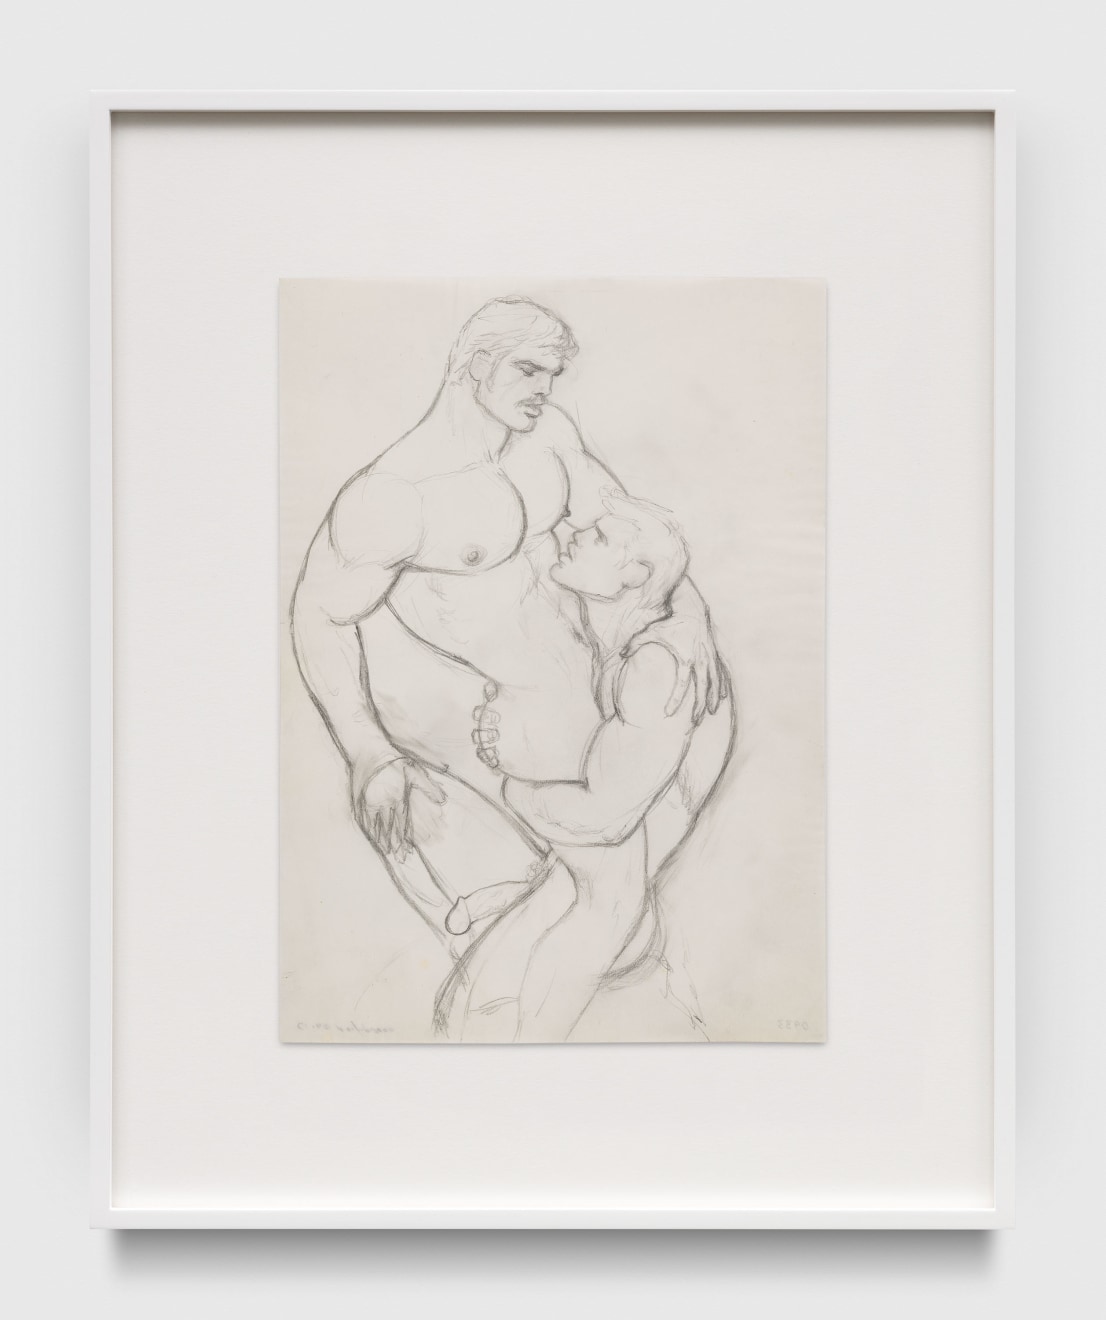 Tom of Finland, Untitled (Preparatory Drawing), c. 1969